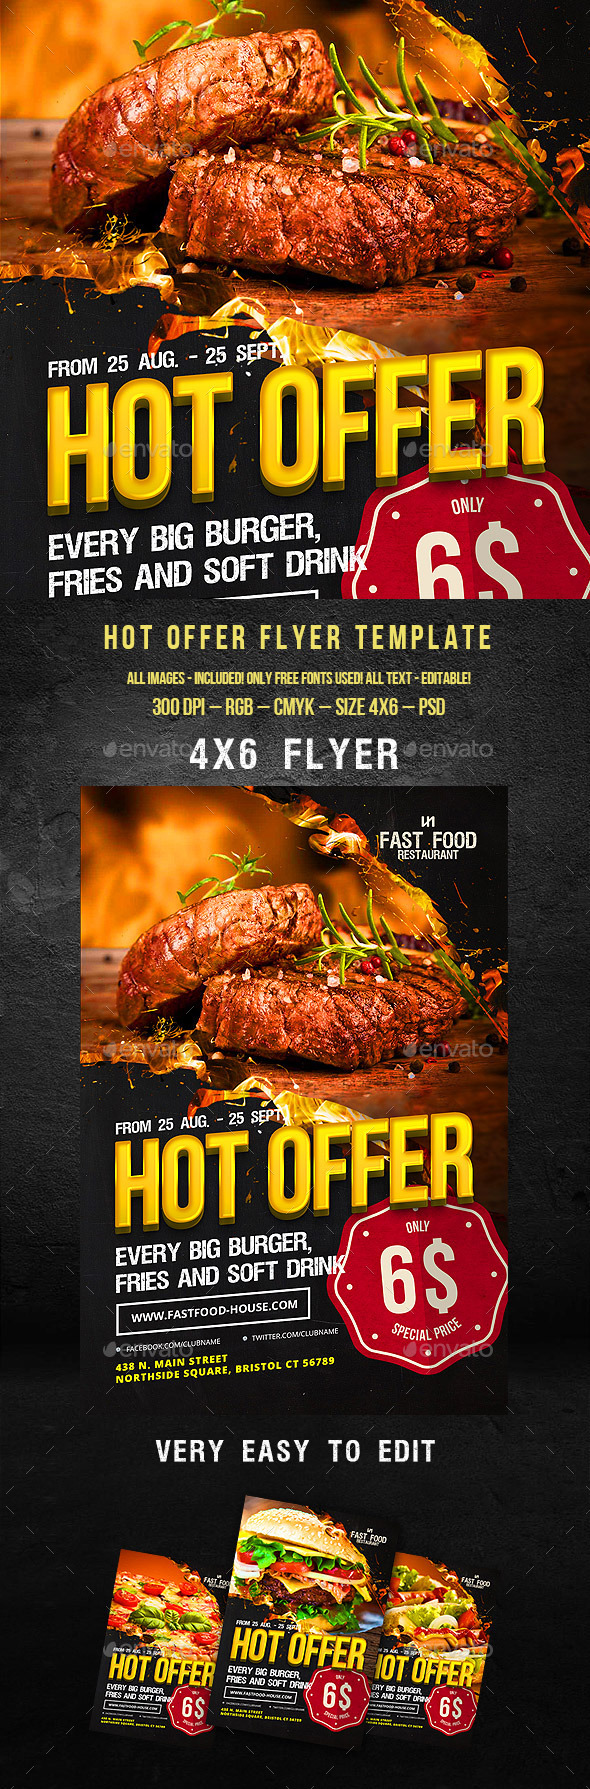 Restaurant Flyer Templates From Graphicriver